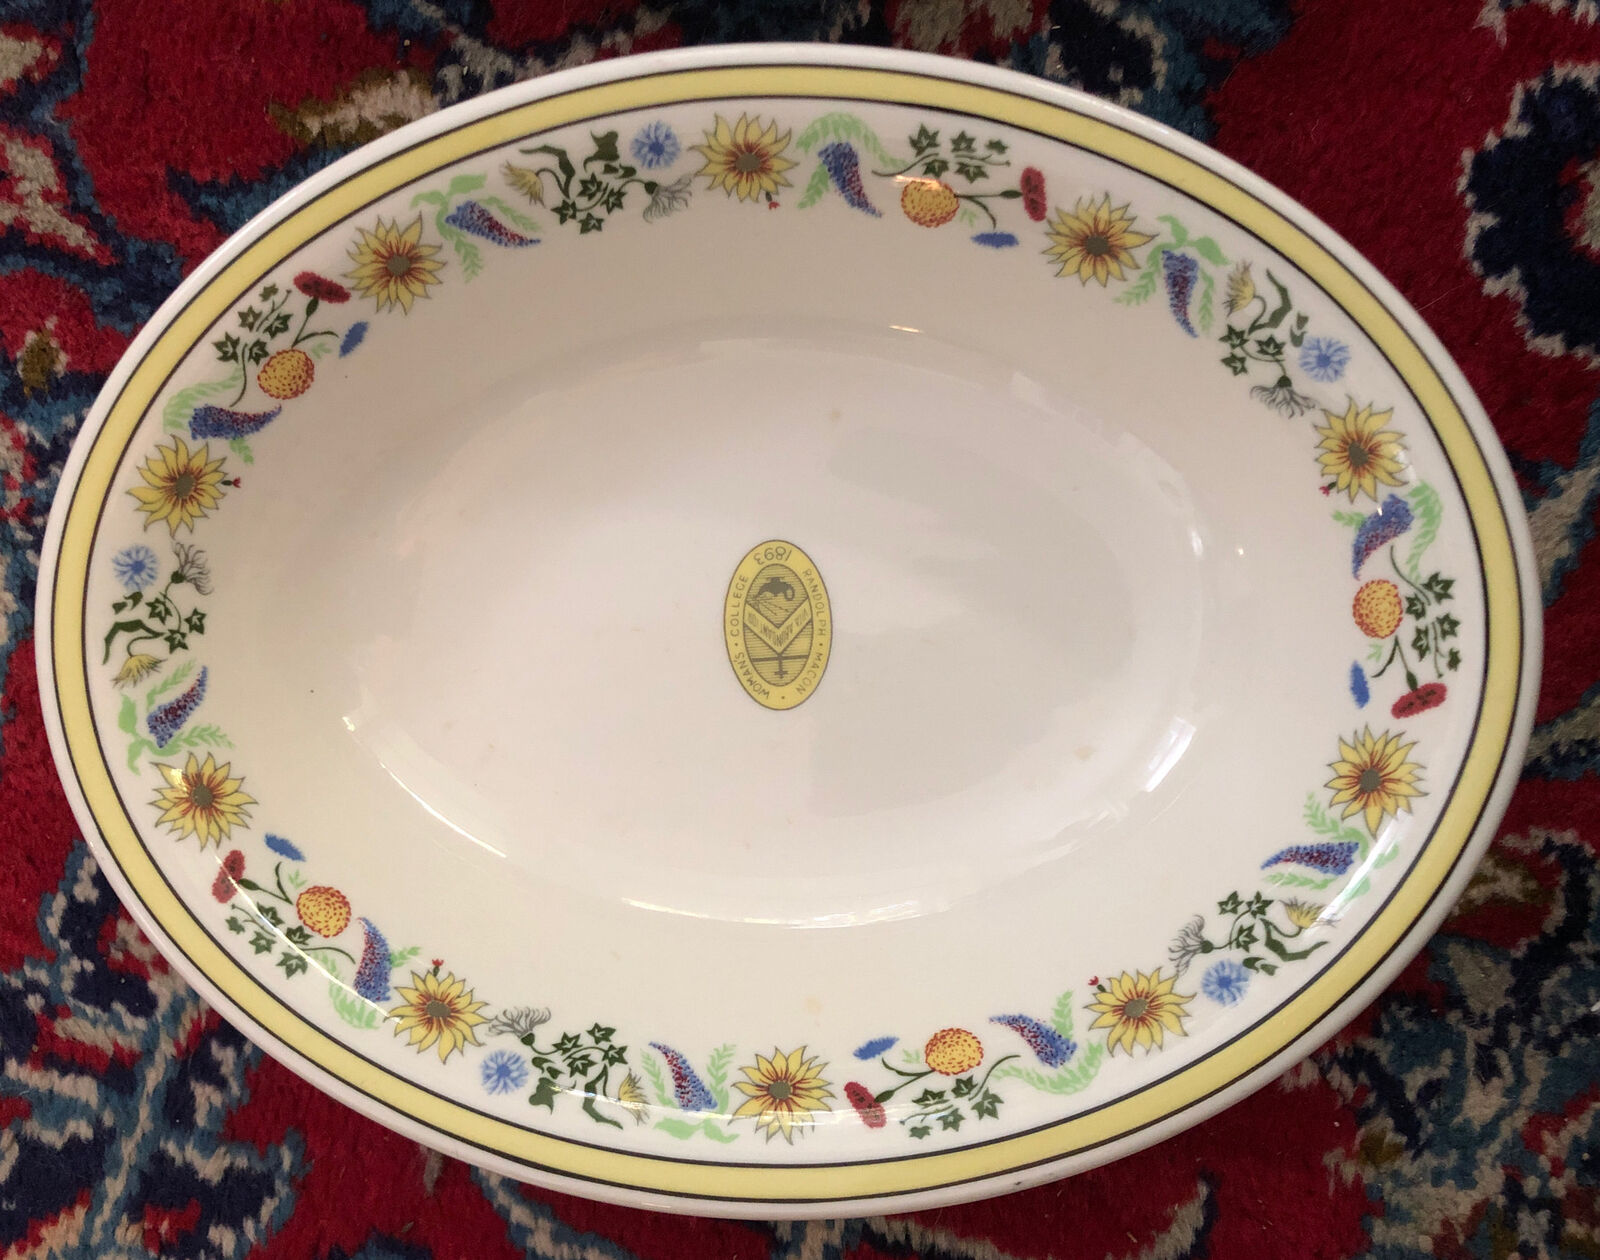 VNTG RANDOLPH MACON WOMEN'S COLLEGE DISHES 10.5” MOOMAW OVAL SERVING BOWL